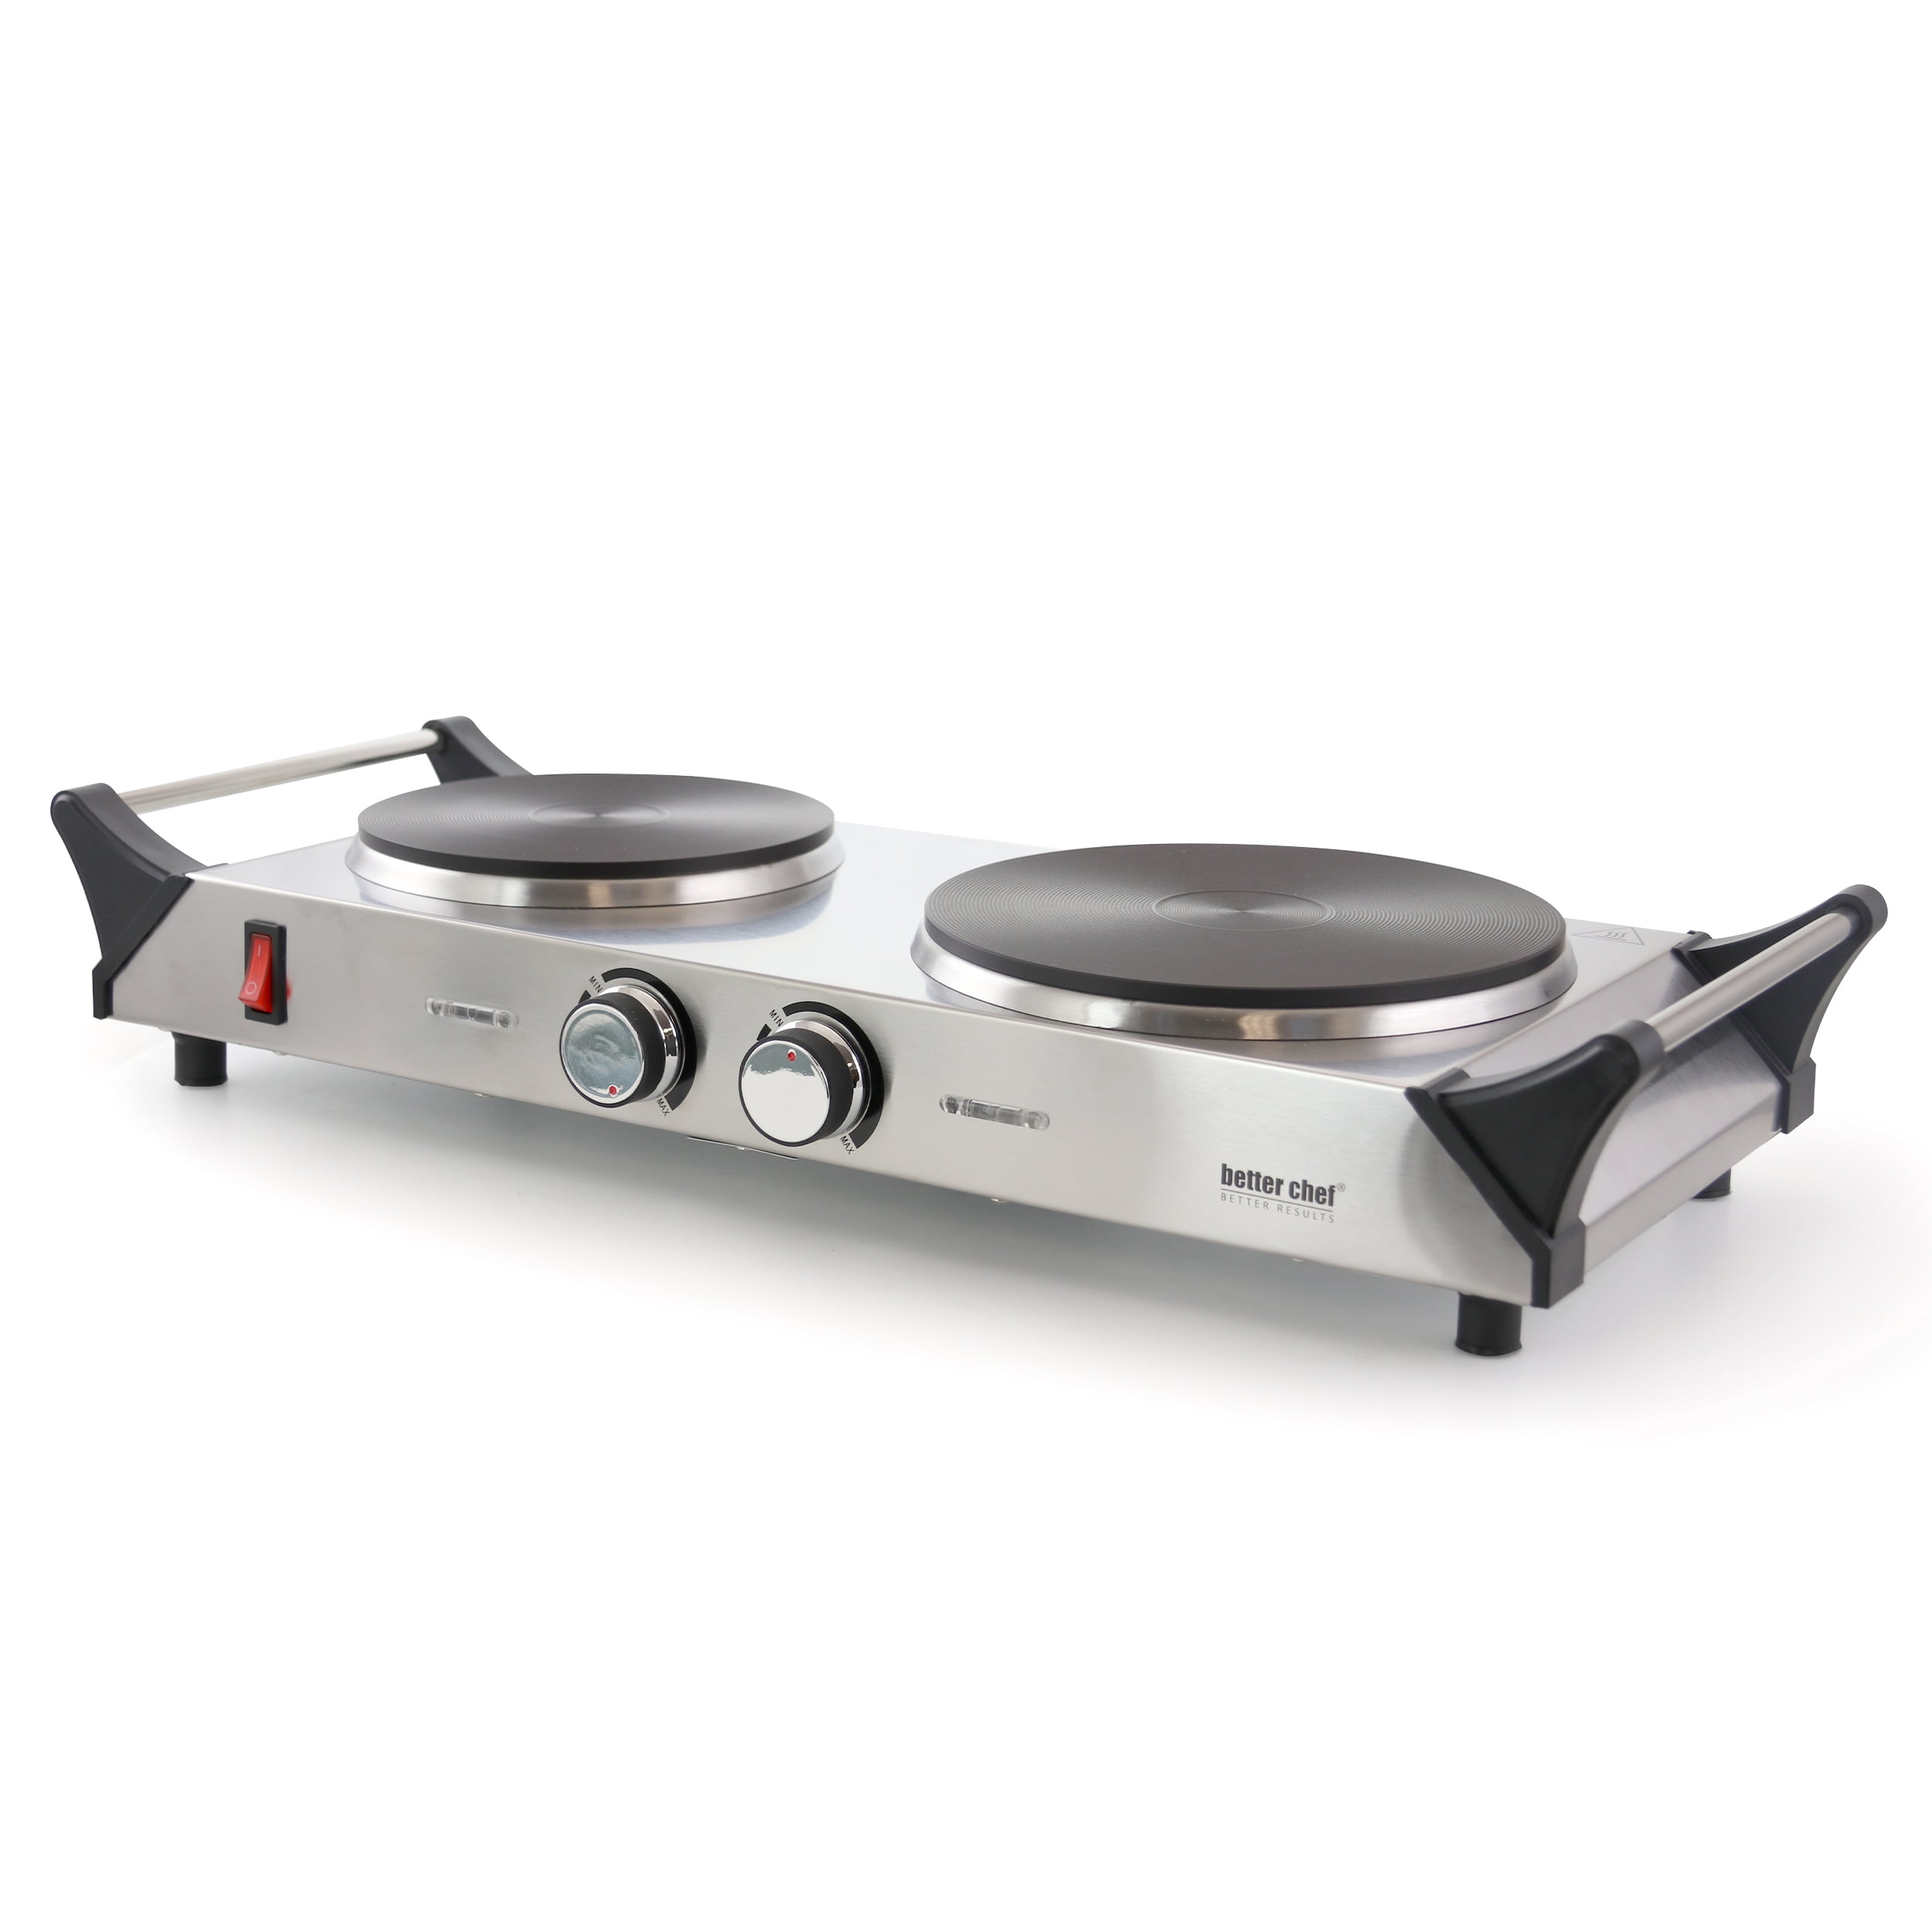 Better Chef Portable Stainless Steel Solid Element Double Electric Burner